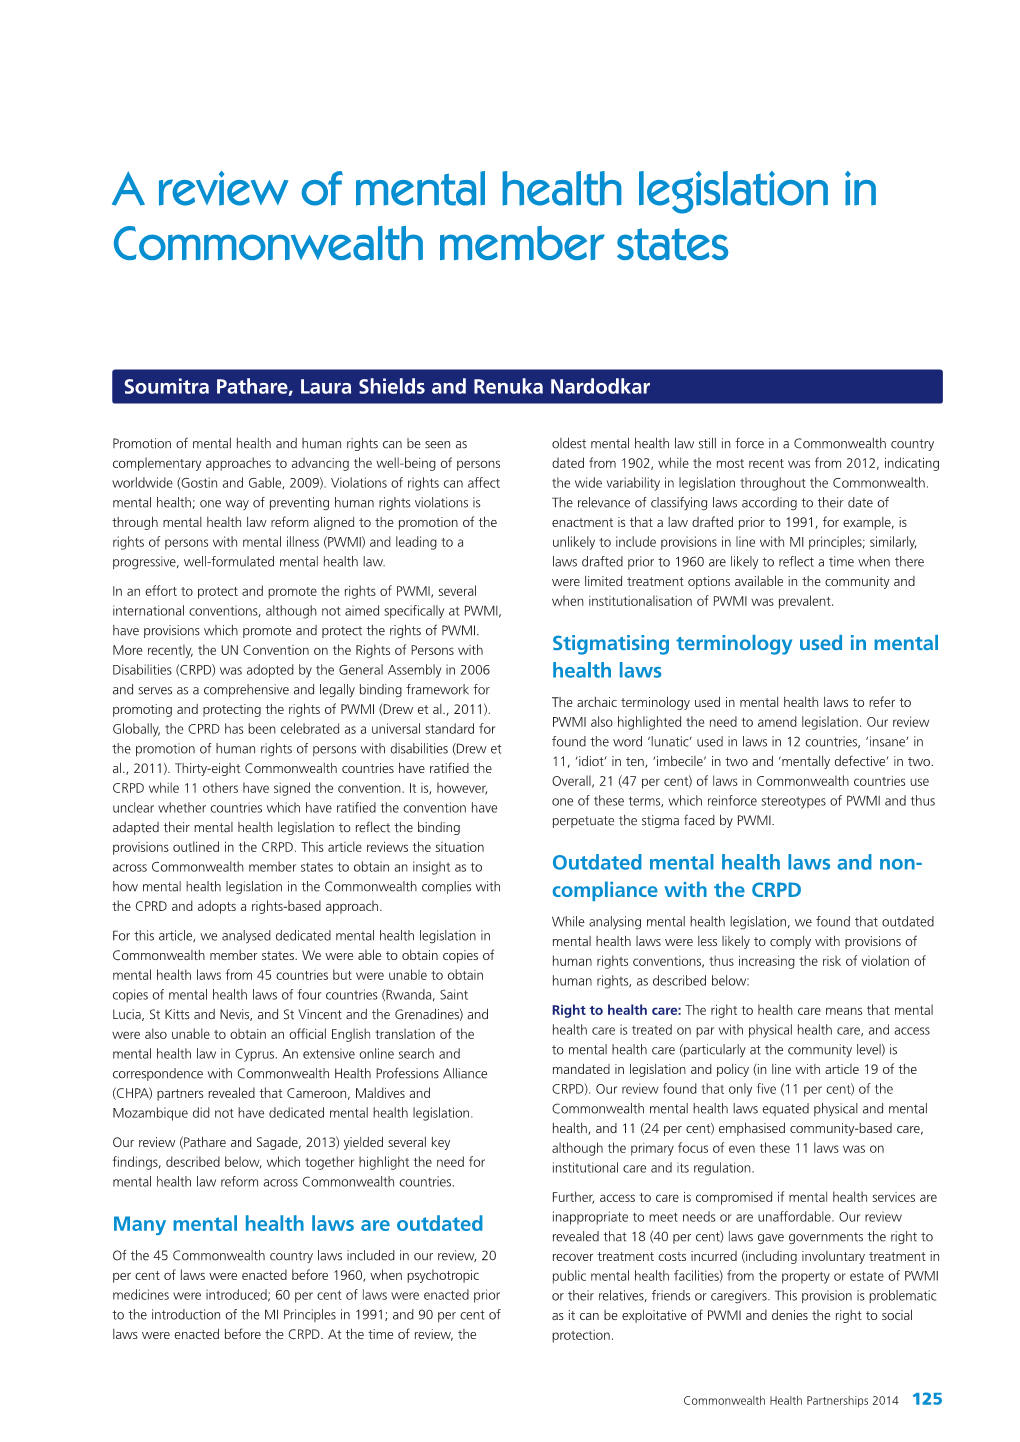 A Review of Mental Health Legislation in Commonwealth Member States